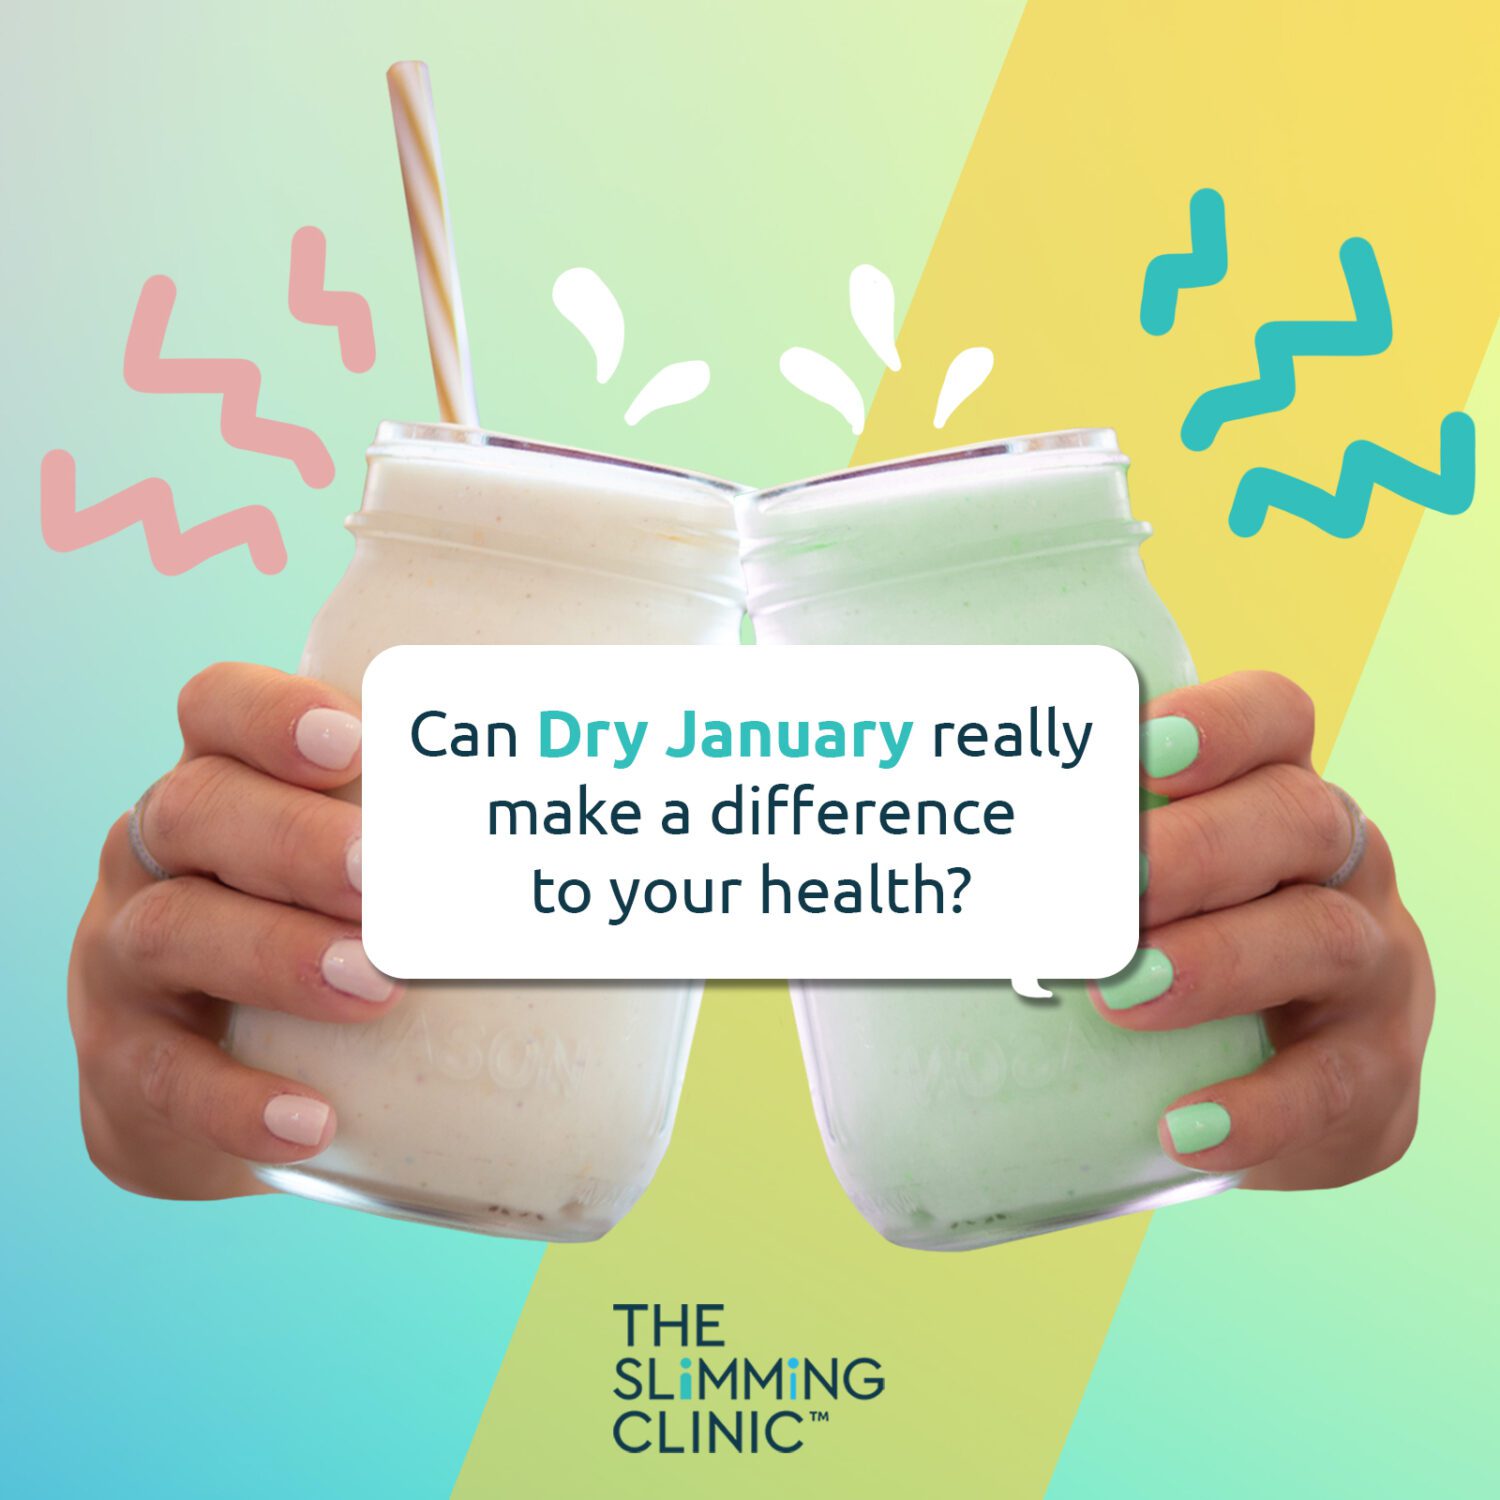 Can Dry January Help With Weight Loss?